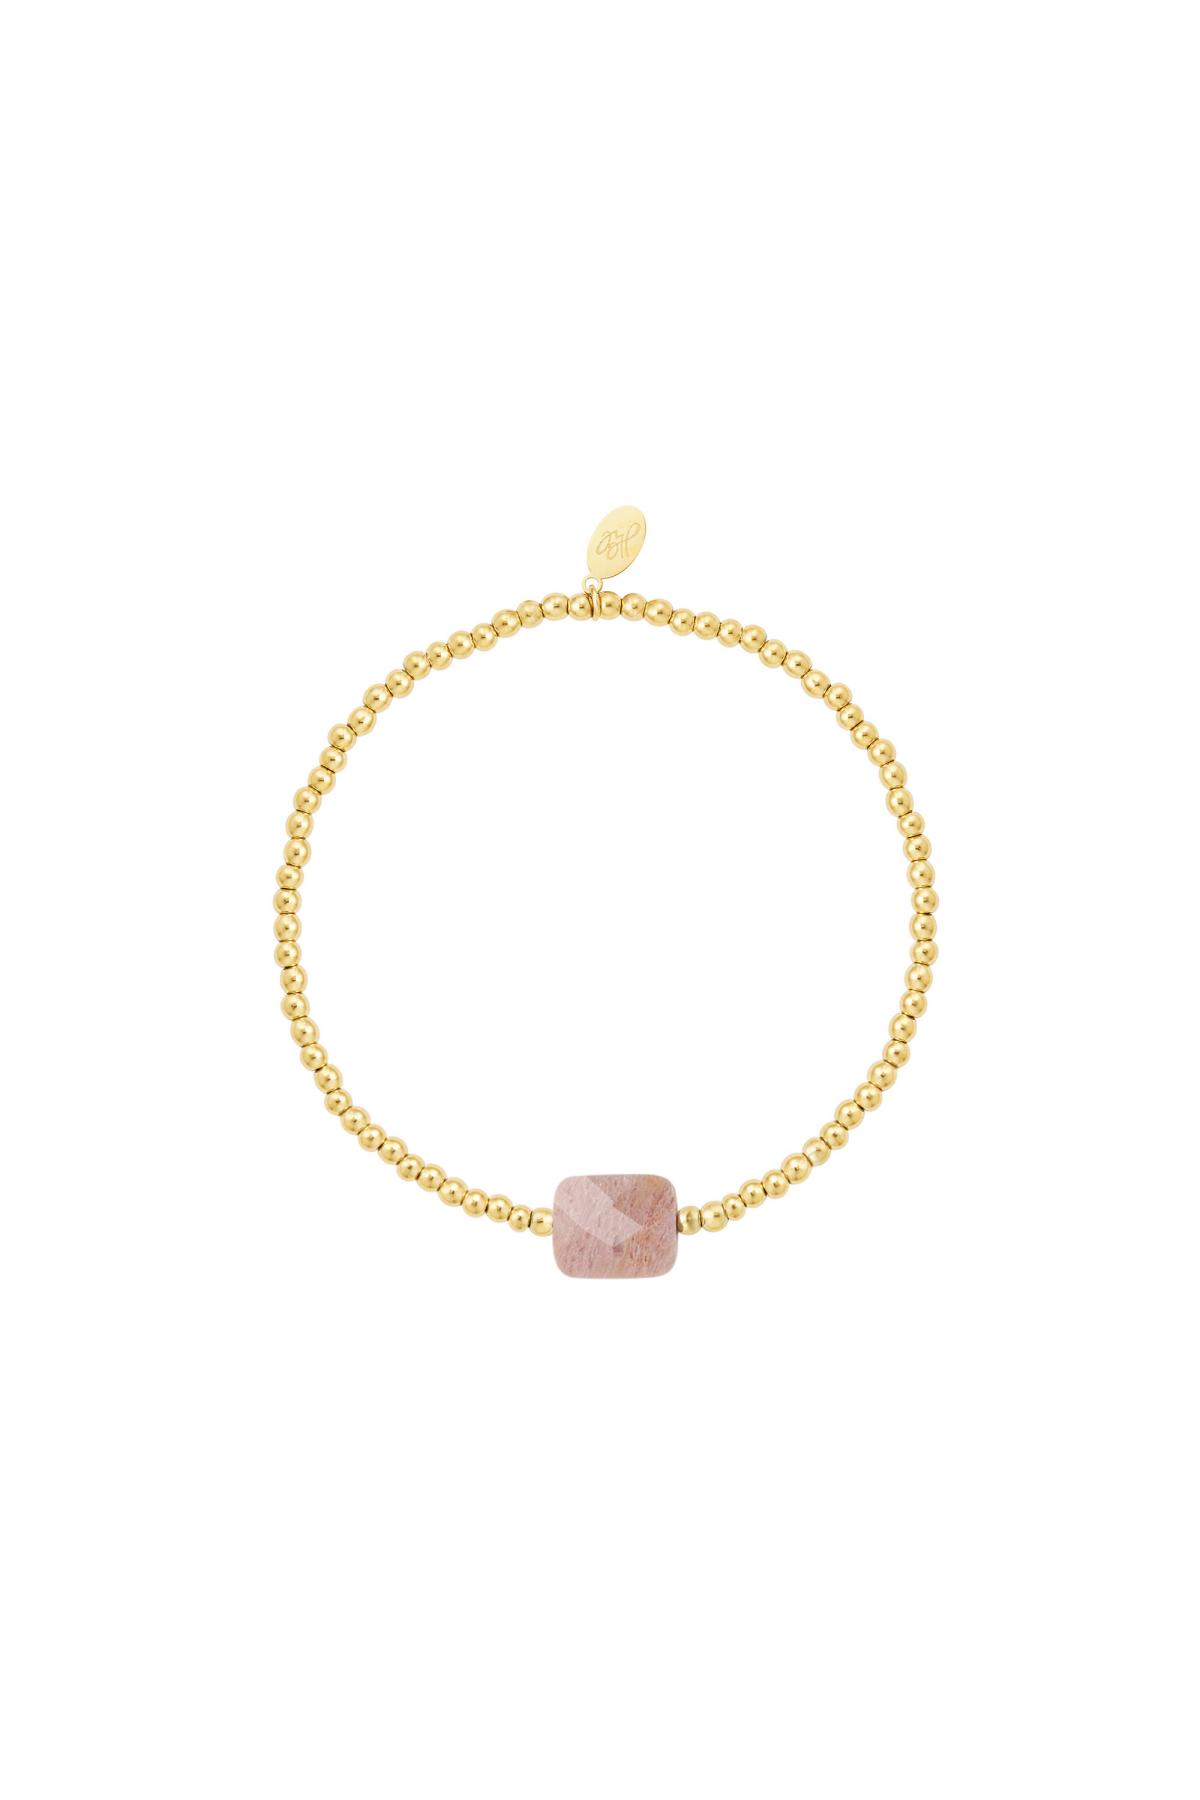 Bracelet beads with large stone - Natural stones collection Pink &amp; Gold Stainless Steel